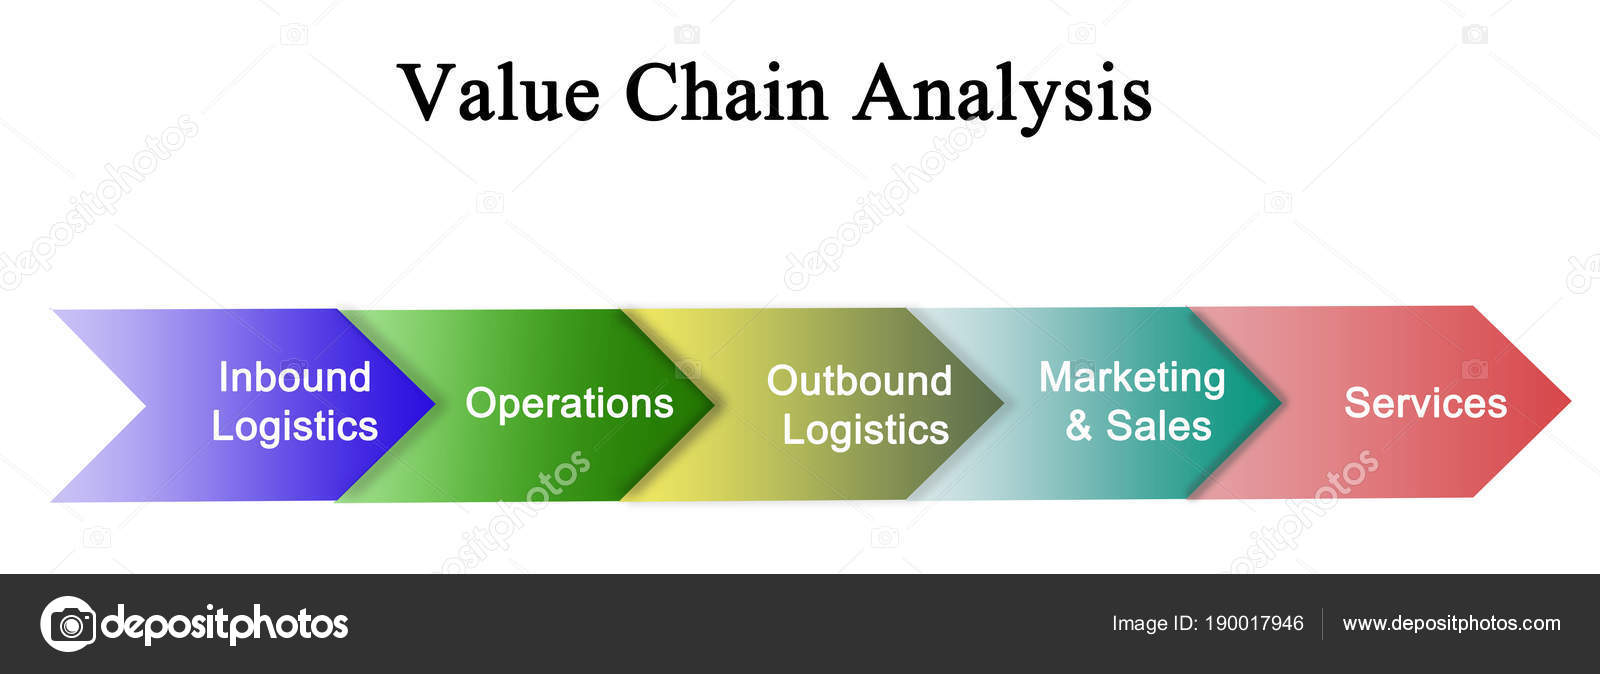 Components Of The Value Chain